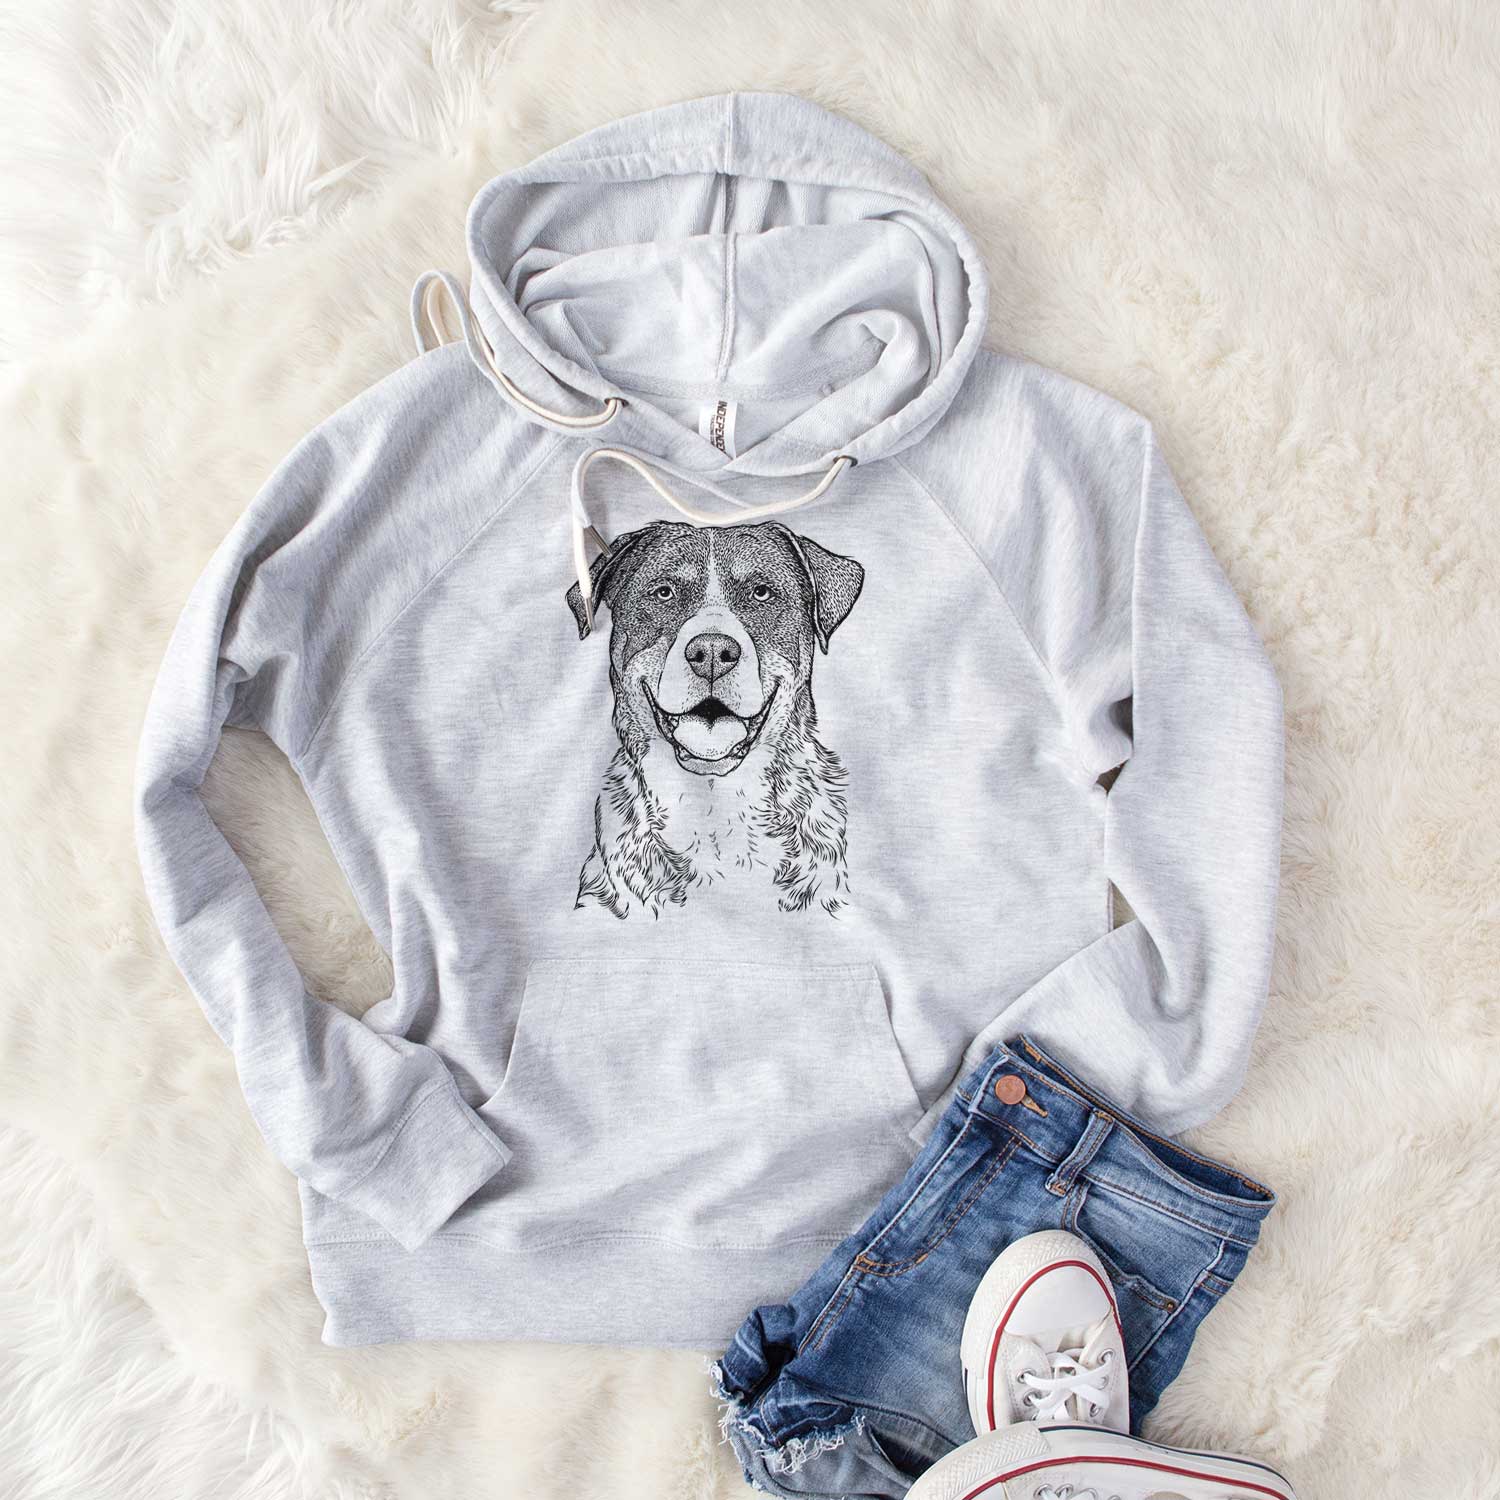 Leon the Greater Swiss Mountain Dog - Unisex Loopback Terry Hoodie